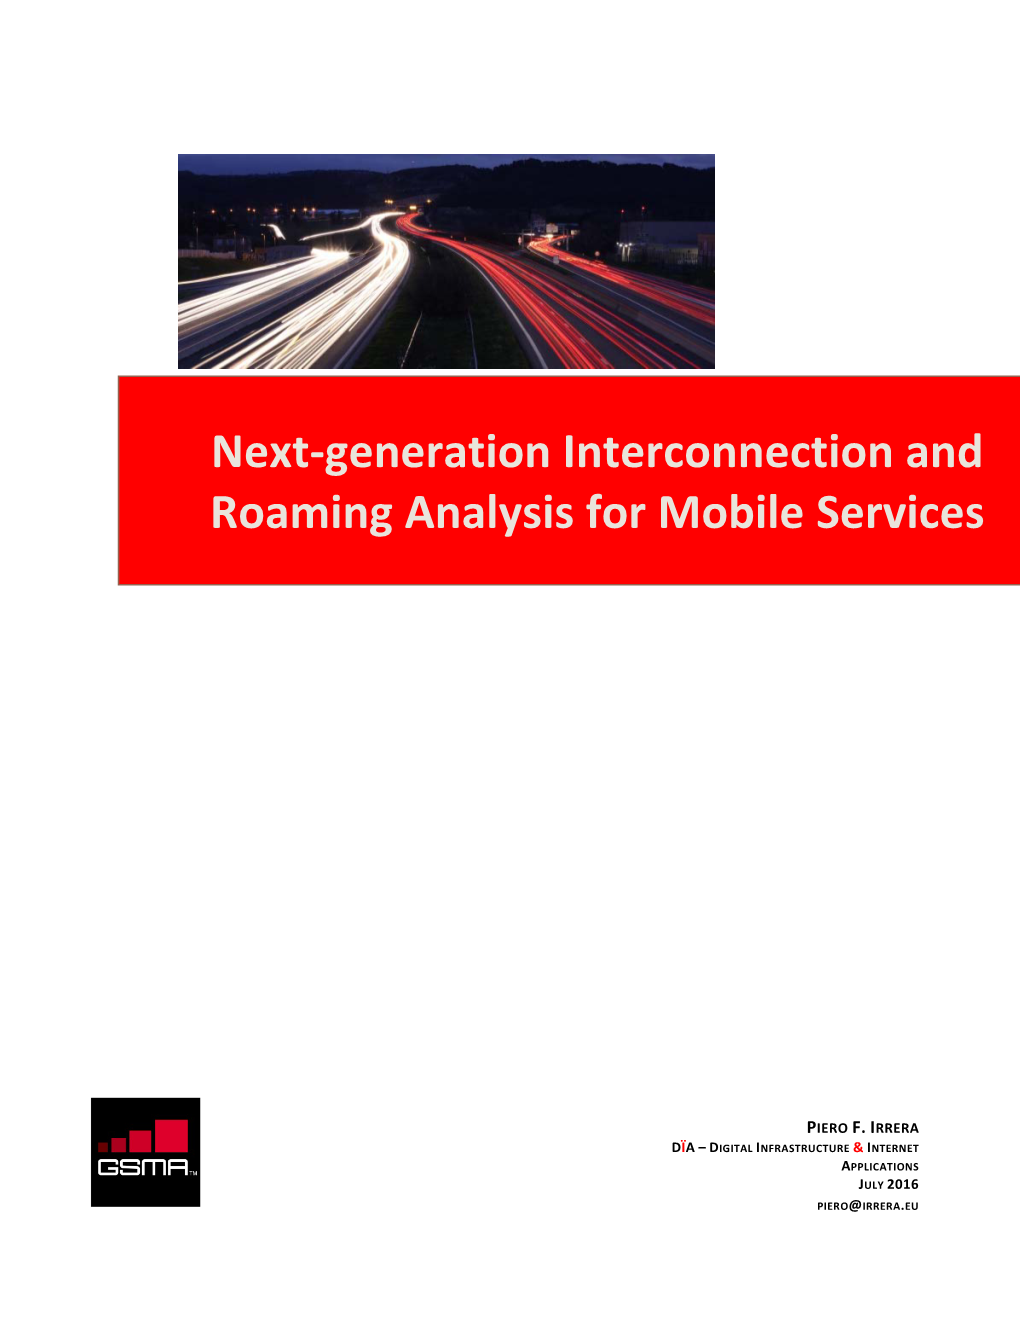 Next-Generation Interconnection and Roaming Analysis for Mobile Services